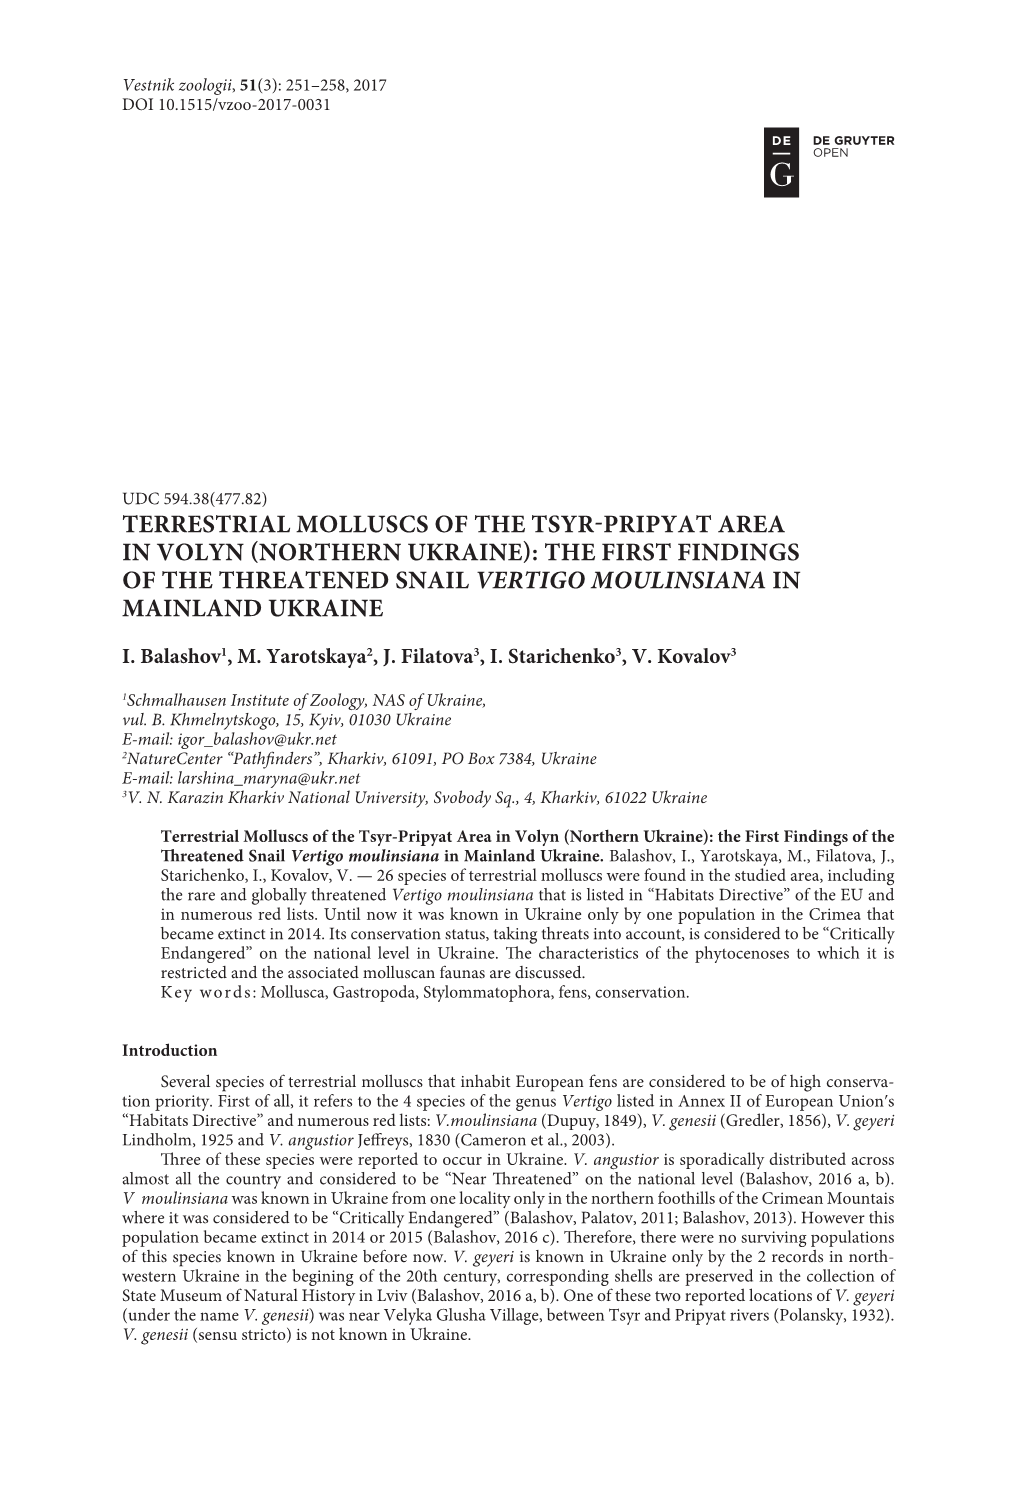 Terrestrial Molluscs of the Tsyr-Pripyat Area in Volyn (Northern Ukraine): the First Findings of the Threatened Snail Vertigo Moulinsiana in Mainland Ukraine